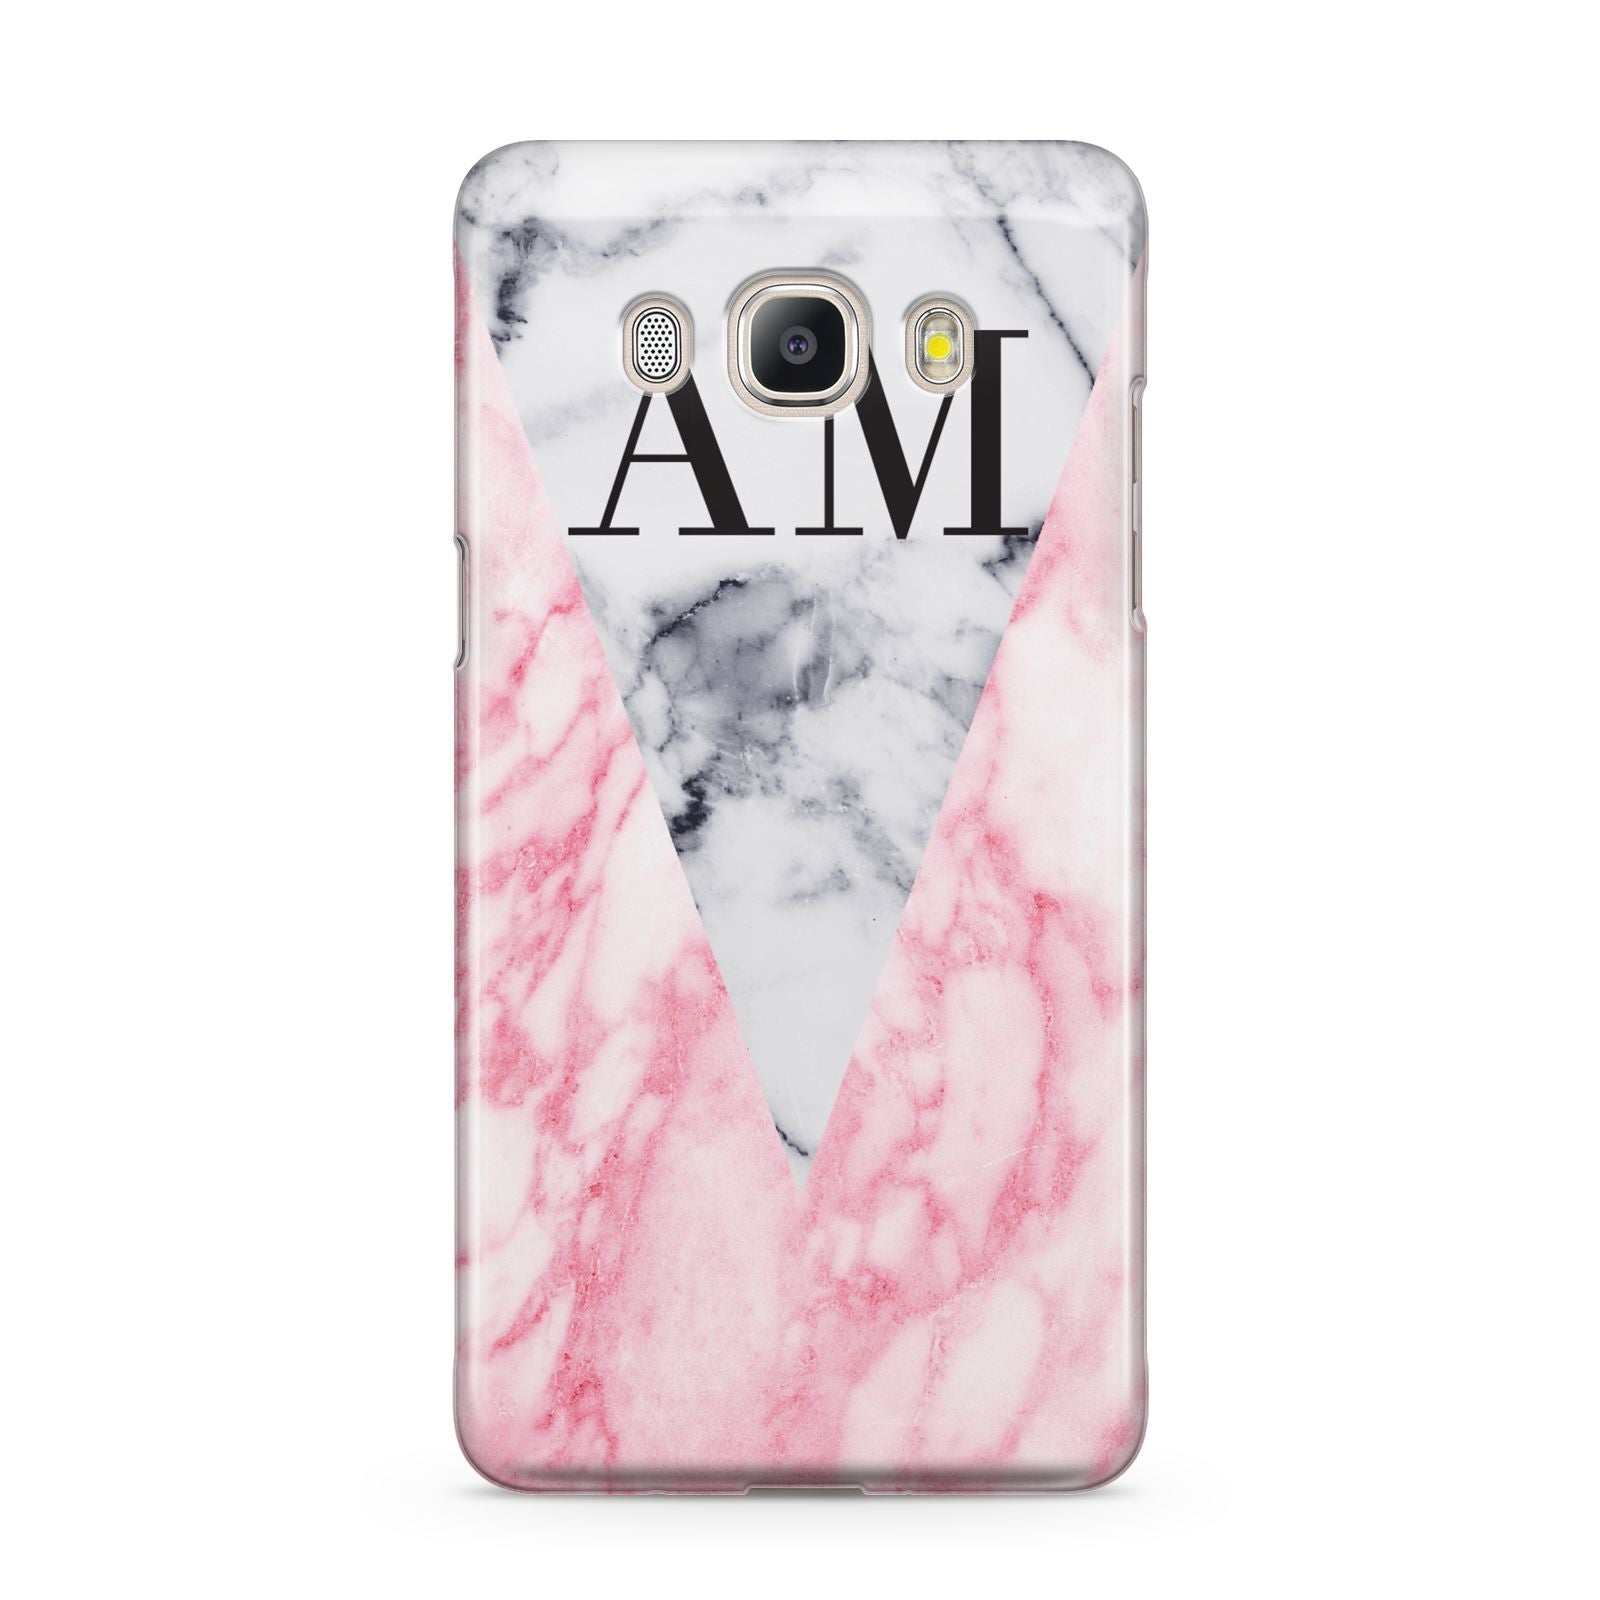 Personalised Grey Inset Marble Initials Samsung Galaxy J5 2016 Case